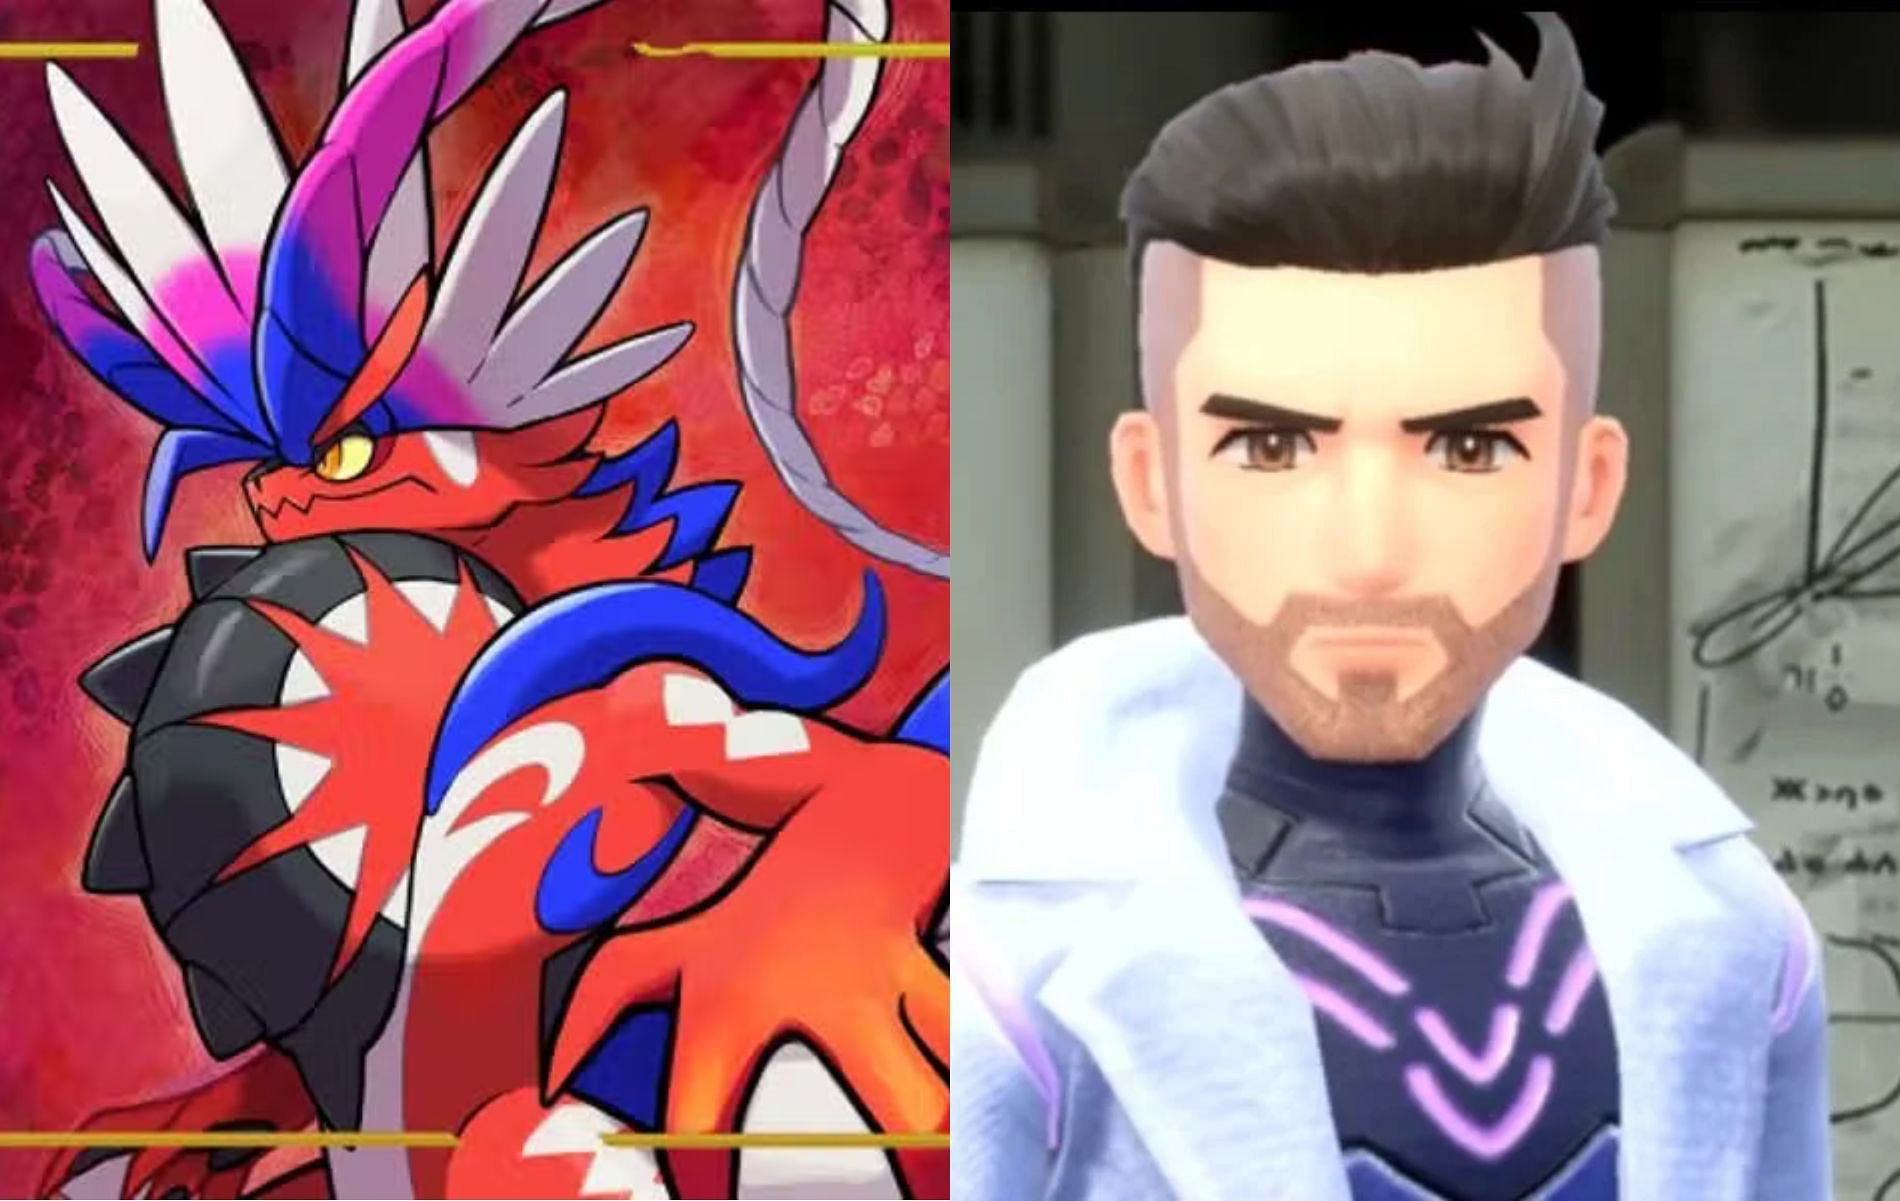 The latest leaks about the upcoming RPG game shared some details that fans may find shocking (Images via The Pokemon Company)